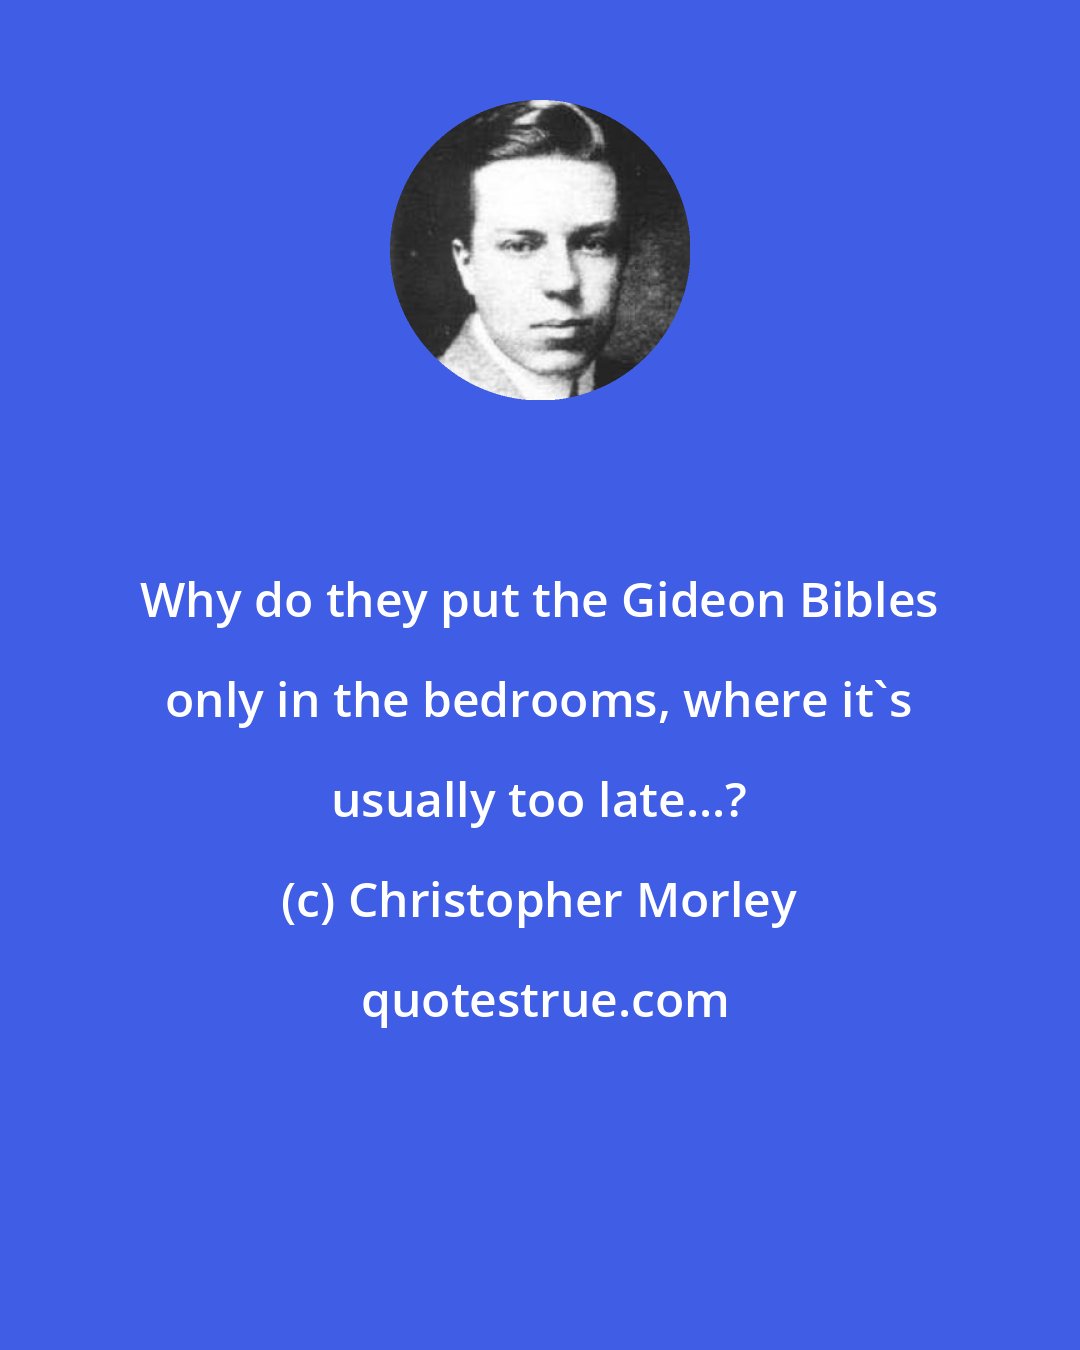 Christopher Morley: Why do they put the Gideon Bibles only in the bedrooms, where it's usually too late...?